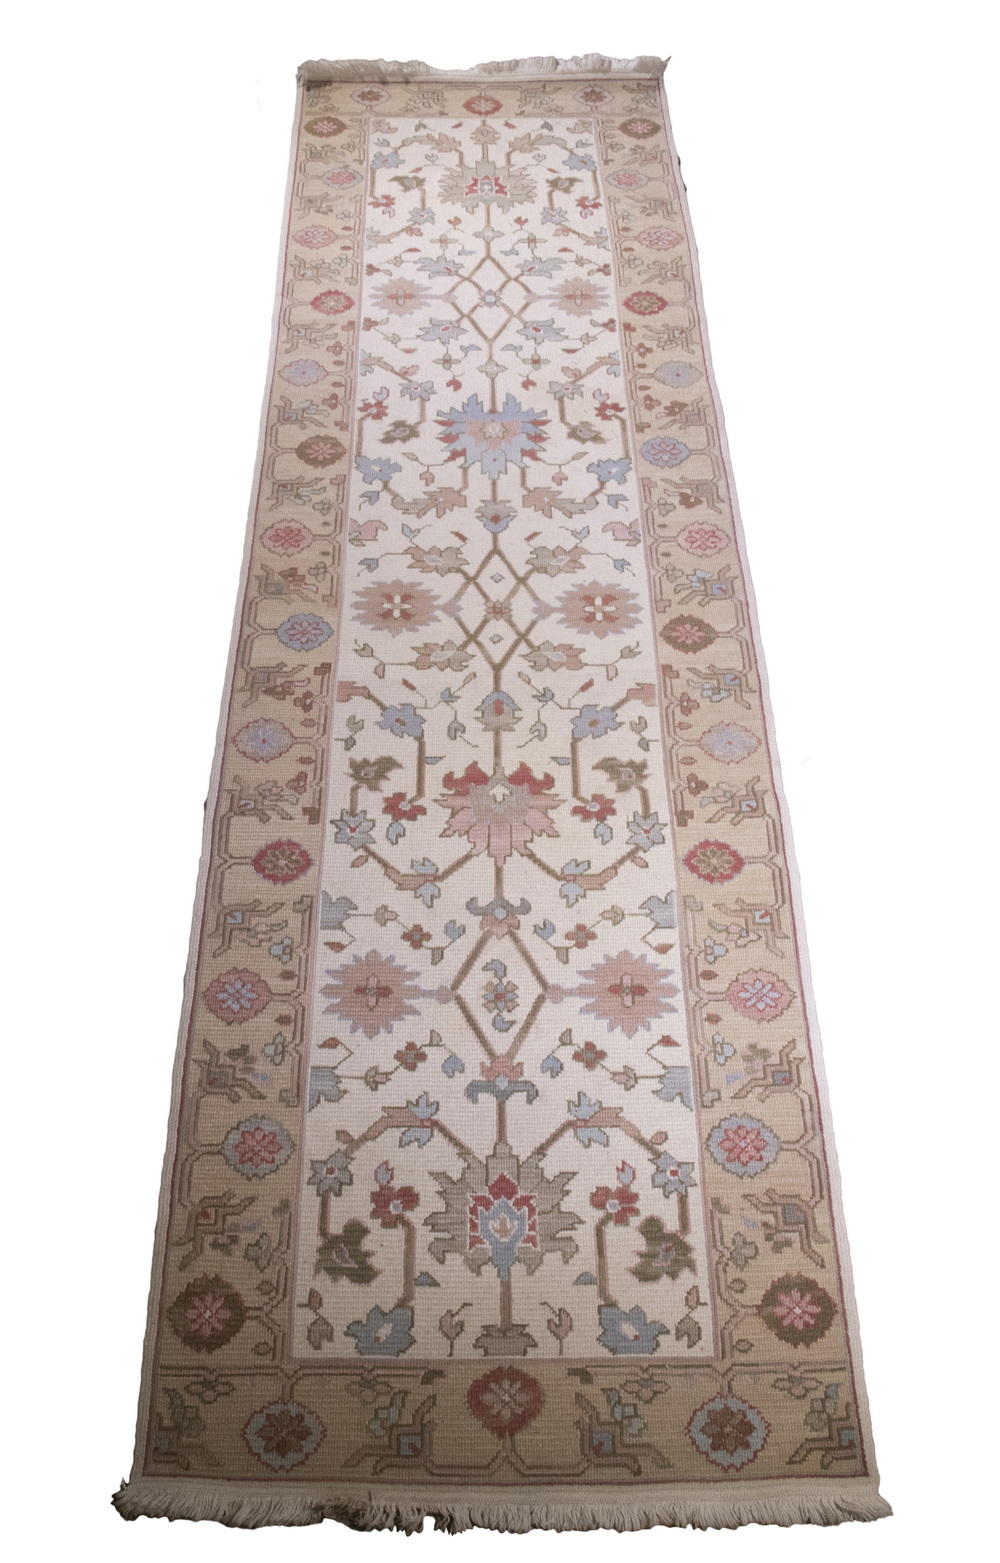 INDIAN CHAIN STITCHED RUNNER 2 7  302198